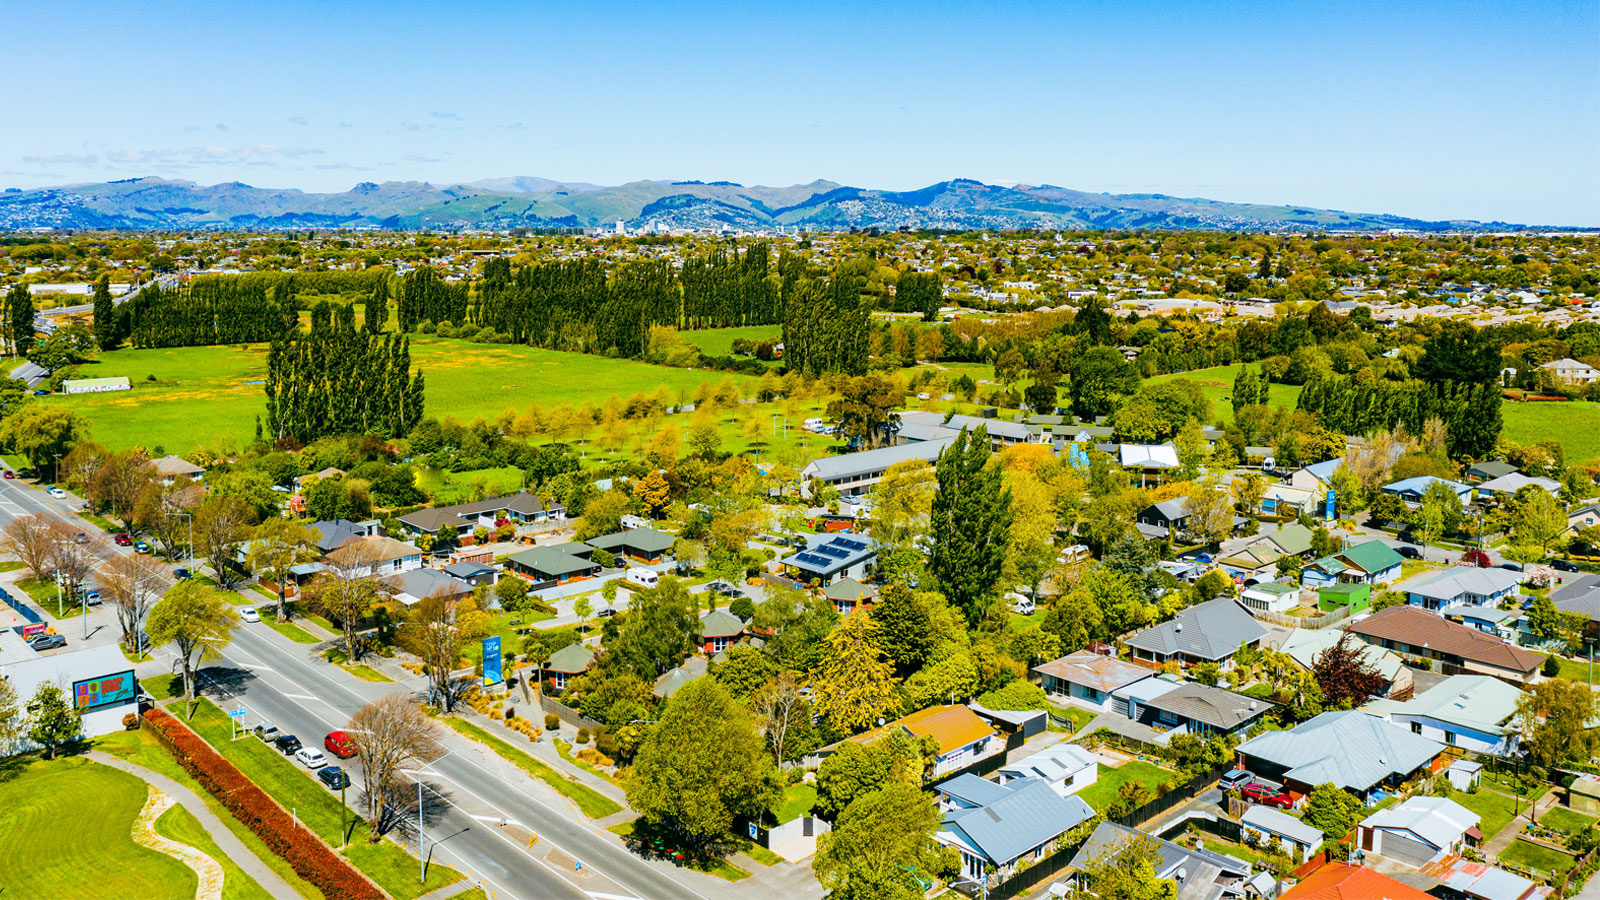 ▲ The Christchurch TOP 10 Holiday Park, located on the outskirts of the Christchurch CBD, has been an iconic destination for travellers over the last 50 years. Image: Supplied